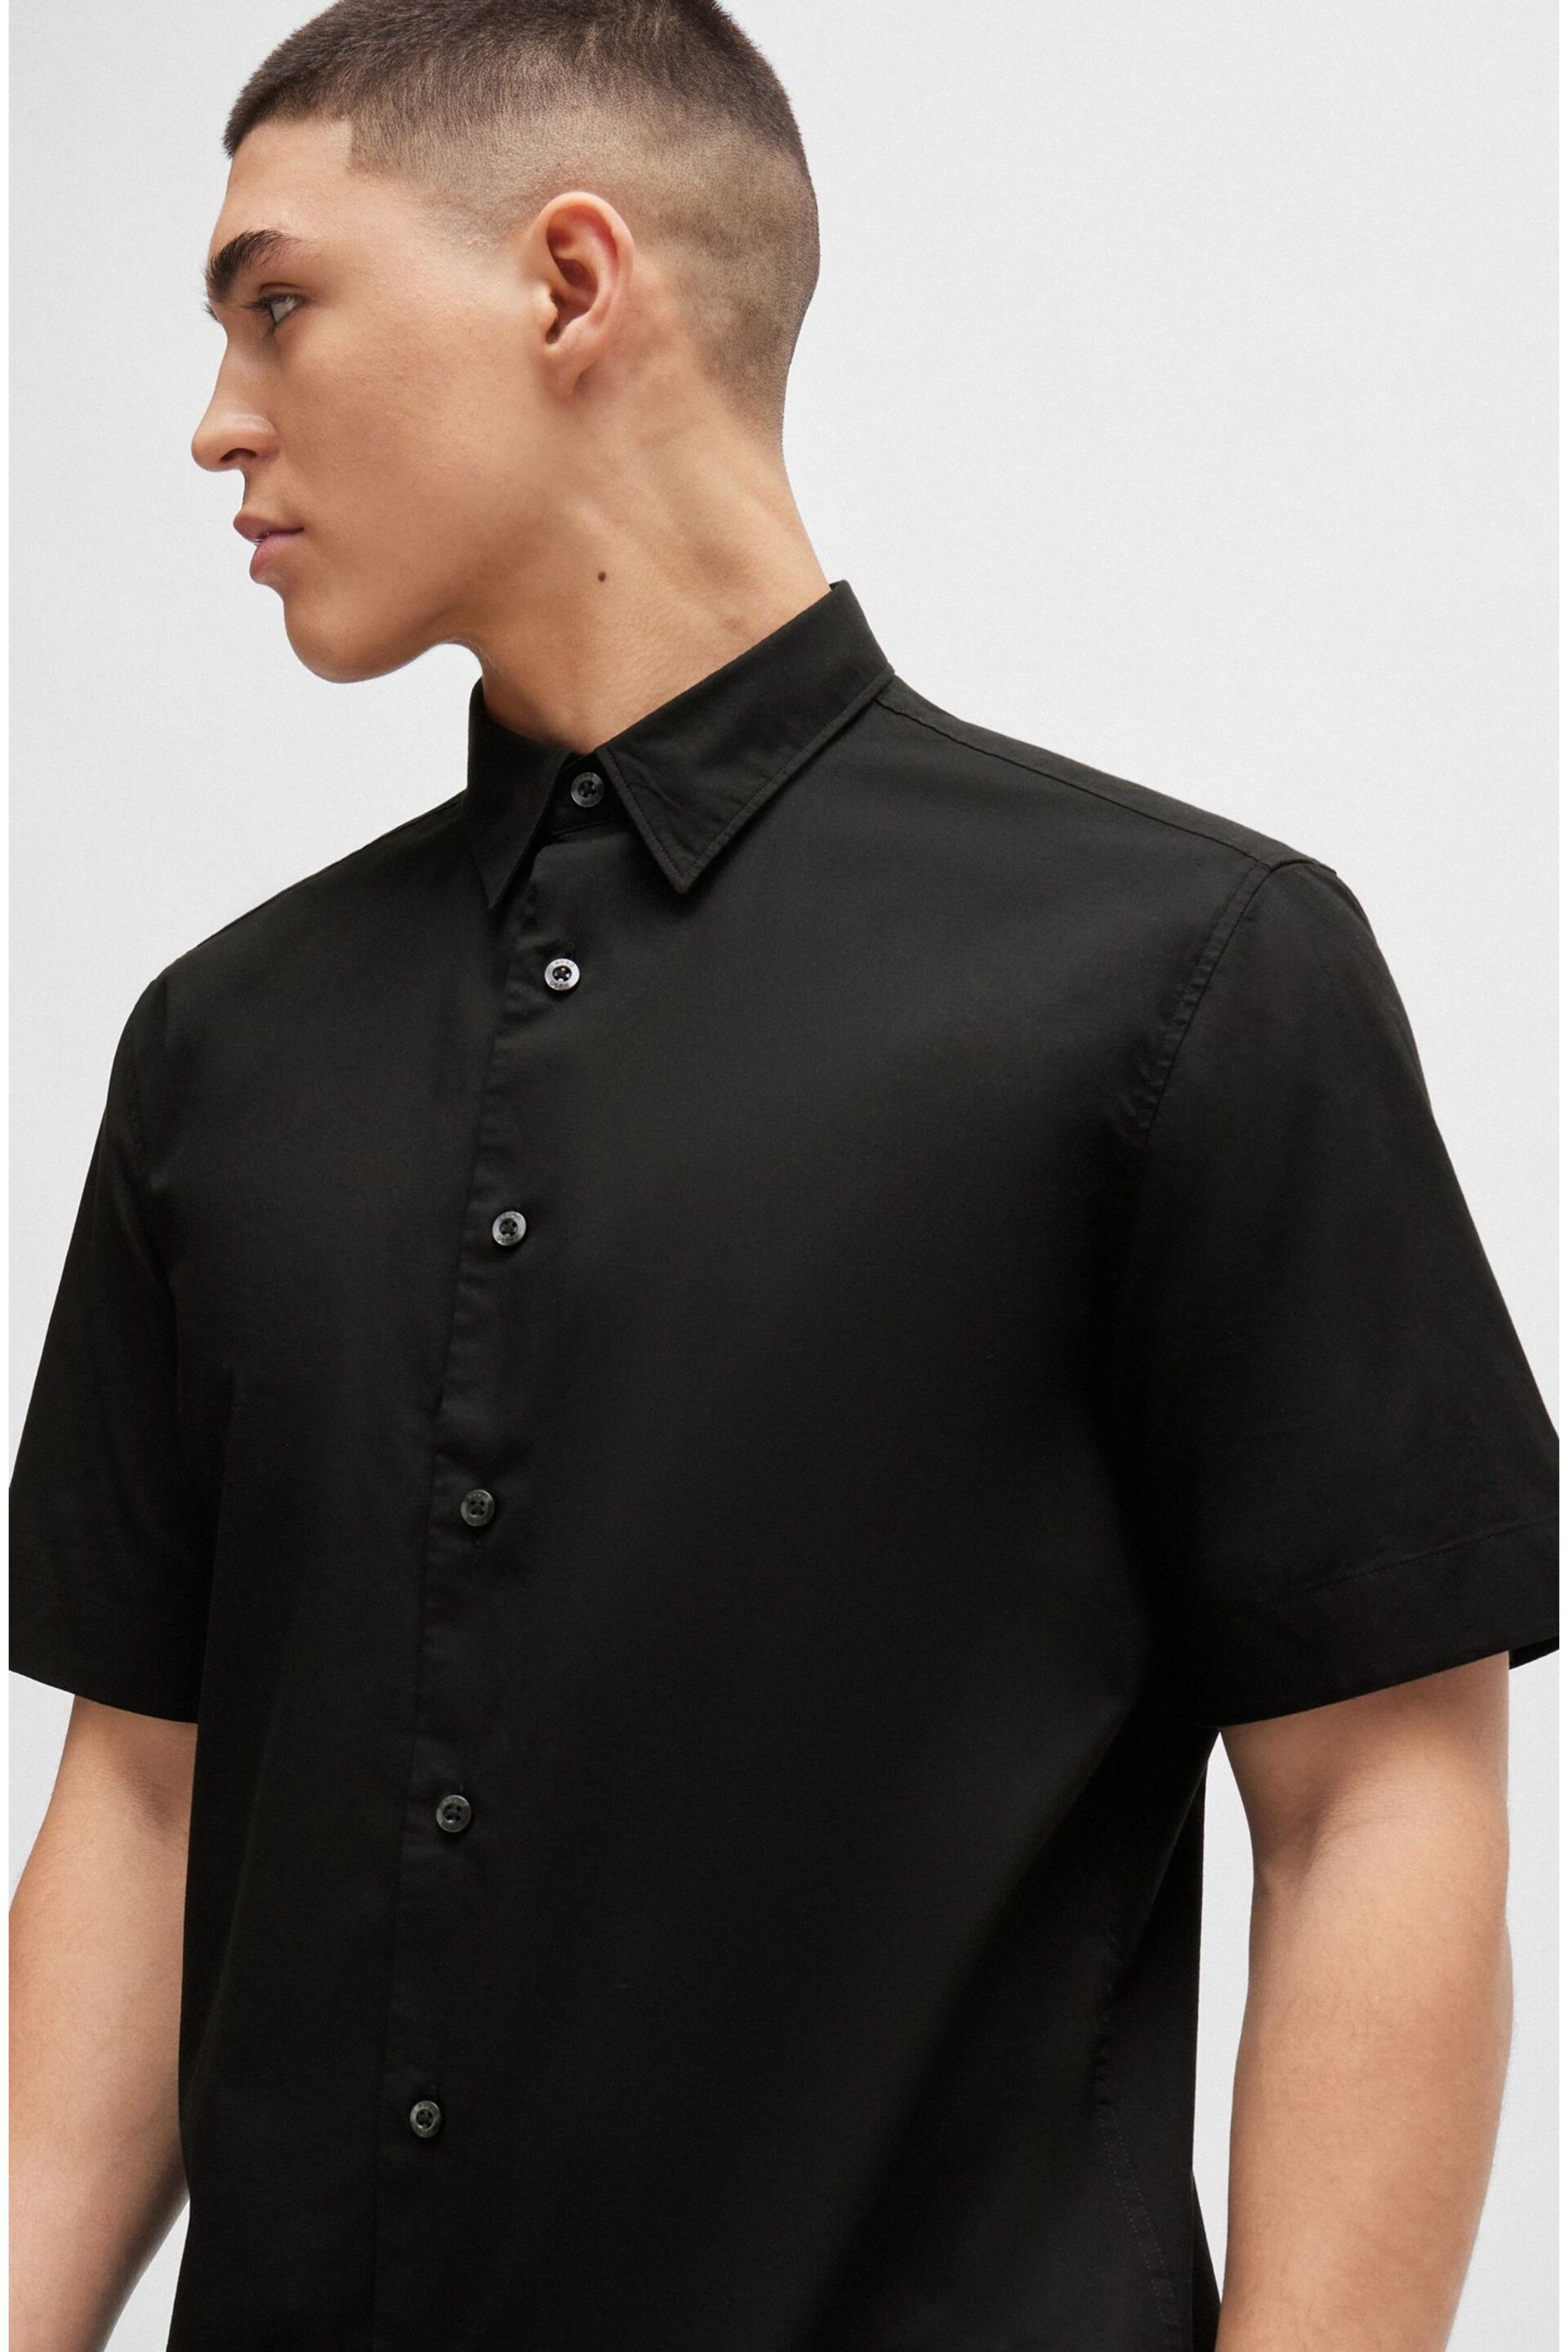 HUGO Relaxed Fit Black Shirt in Stretch Cotton Canvas - Image 5 of 6